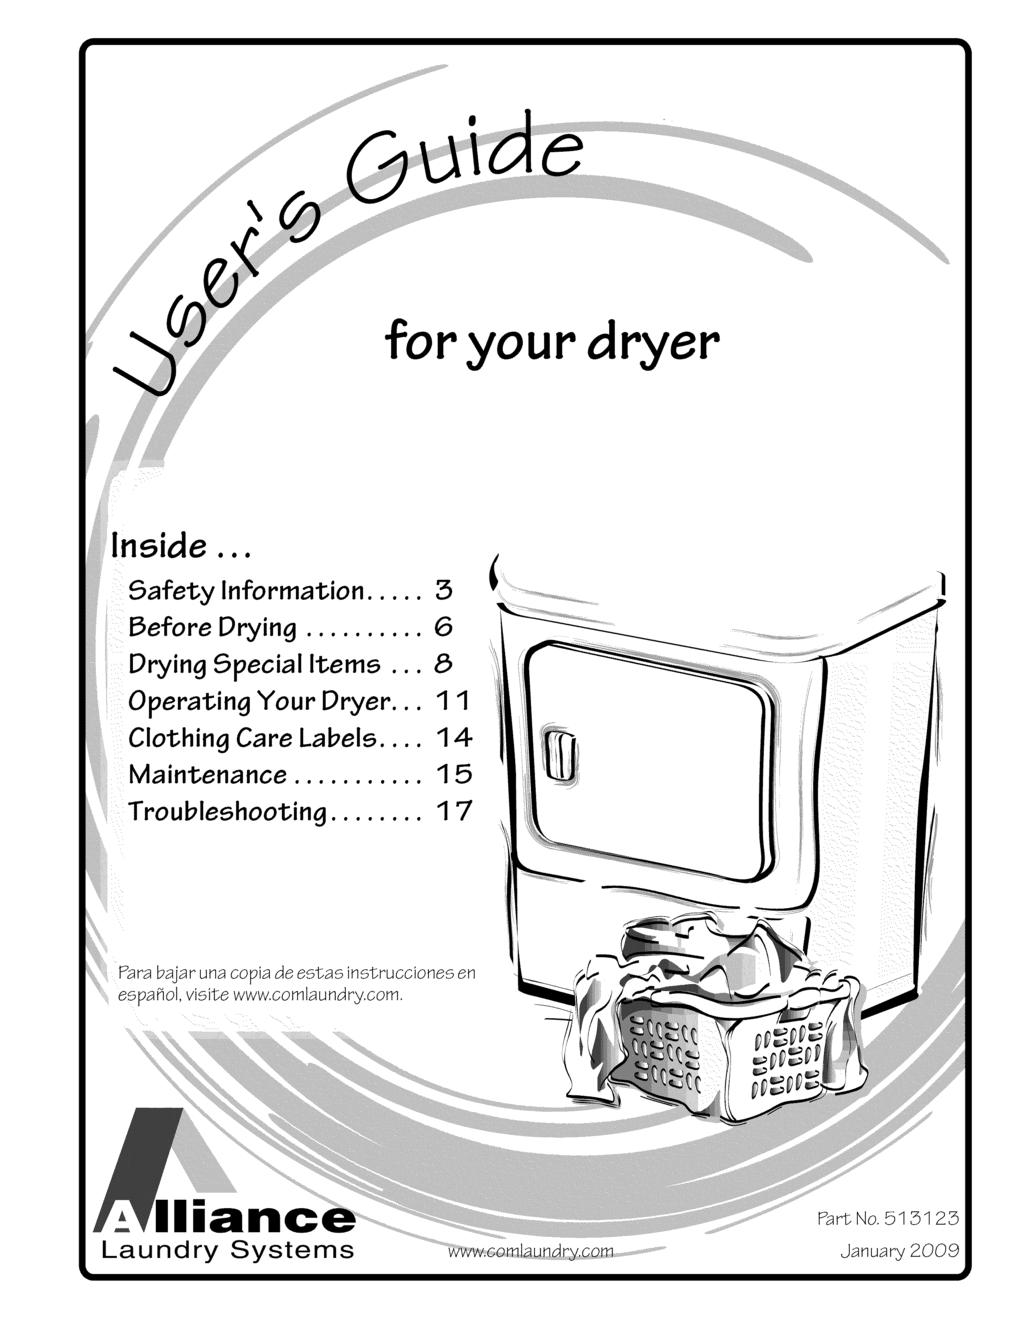 \ for your dryer Inside... Safety Information... 3 Before Drying... 6 Drying Special Items... 8 Operating Your Dryer... 1 1 Clothing Care Labels.